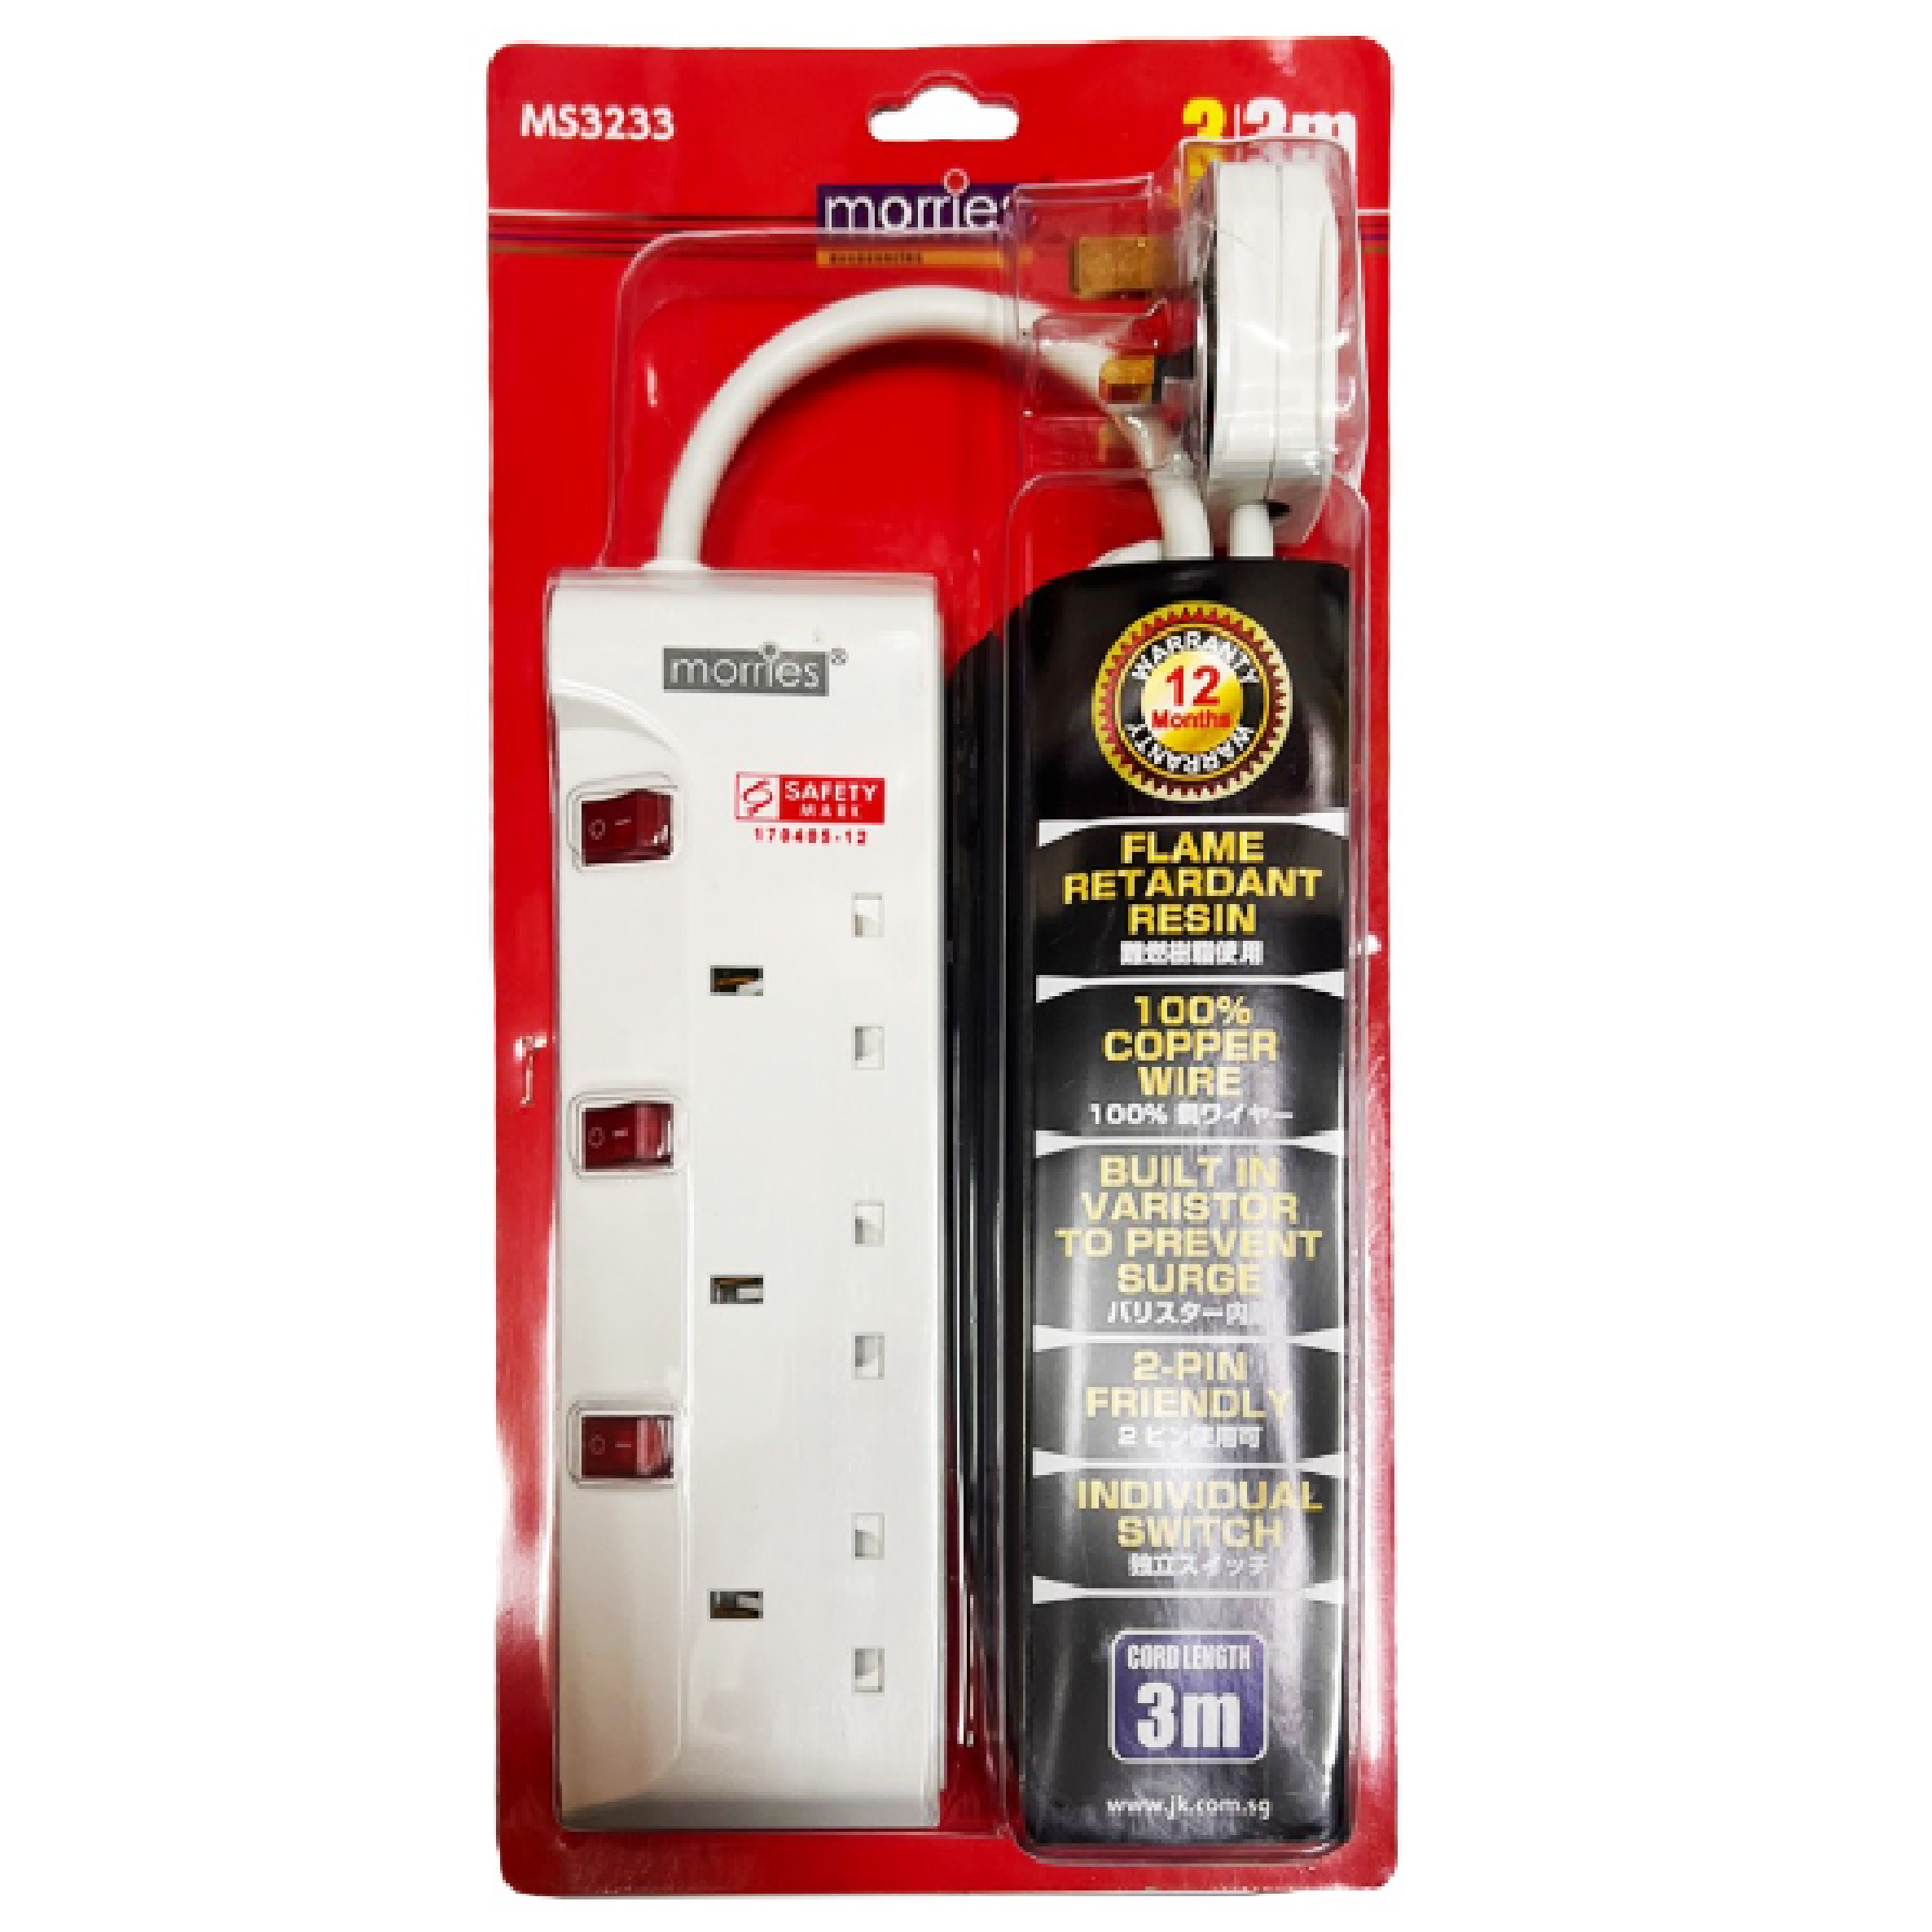 Morries 3 Way 3M Extension Cord MS3233